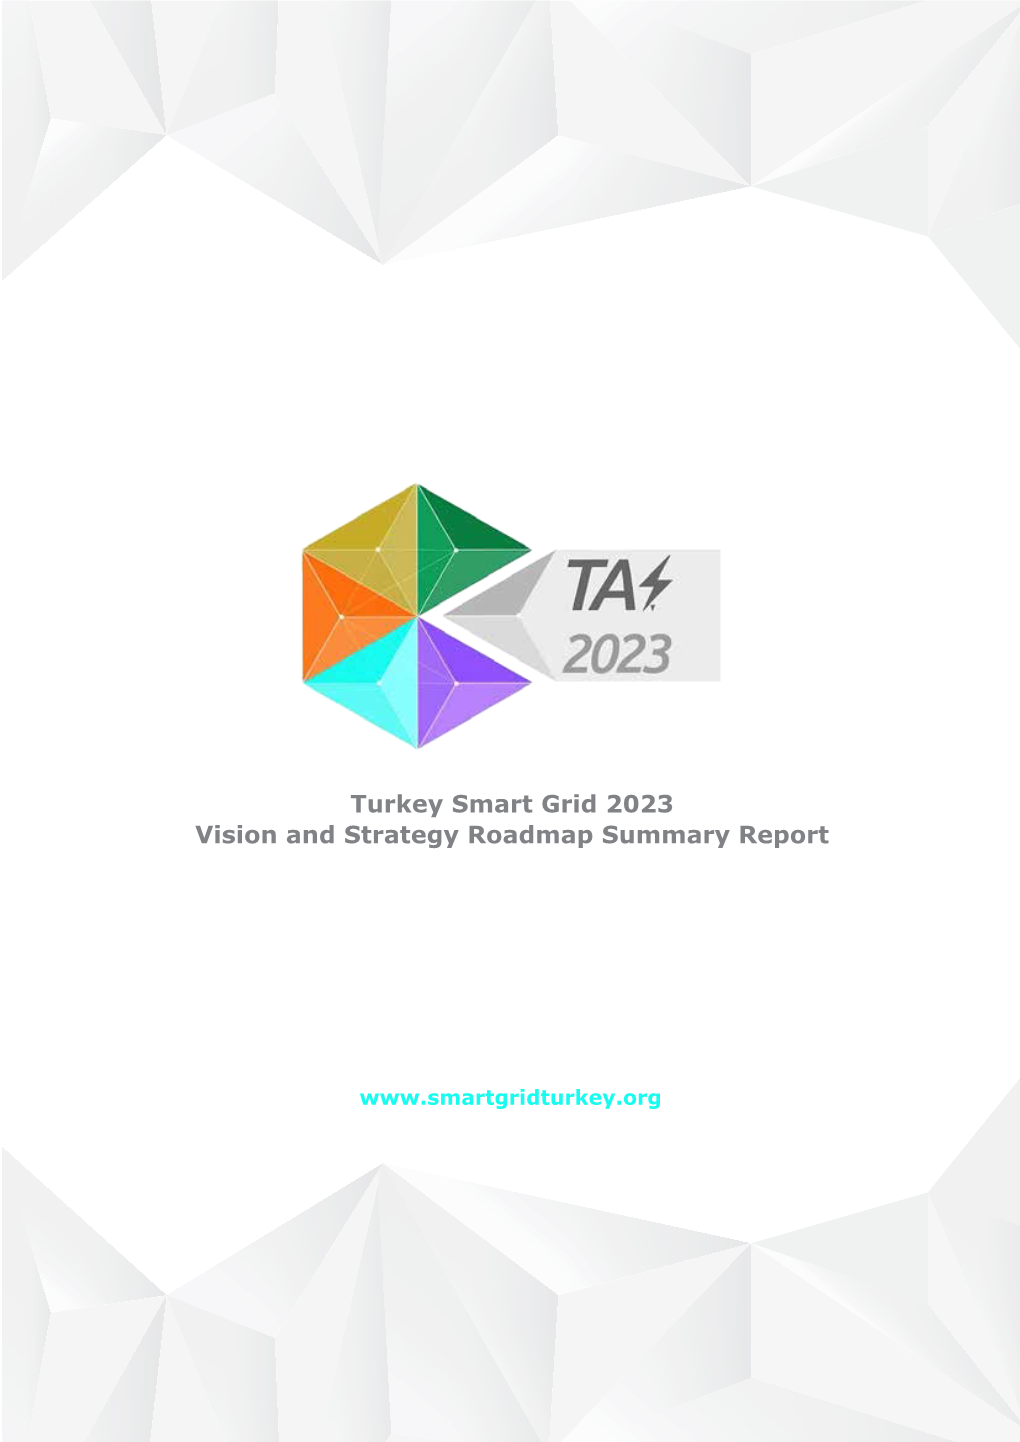 Turkey Smart Grid 2023 Vision and Strategy Roadmap Summary Report